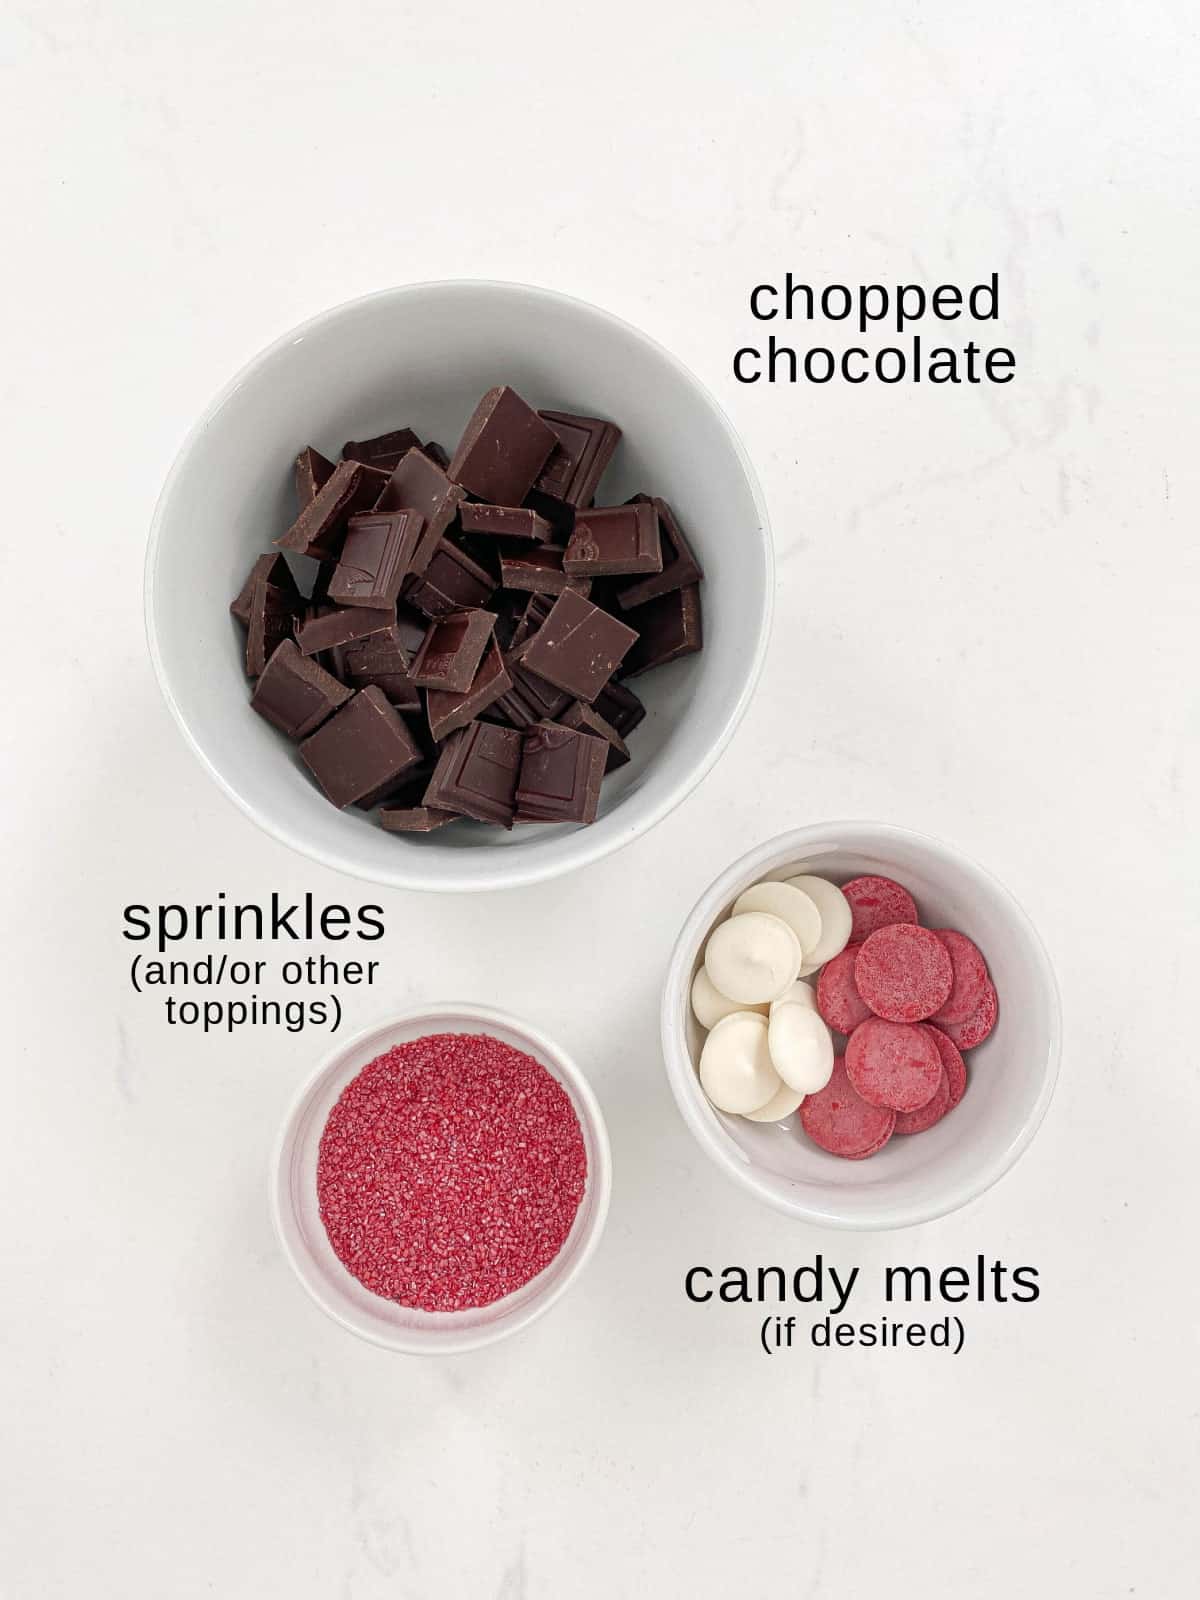 Chocolate bark ingredients on a white background.